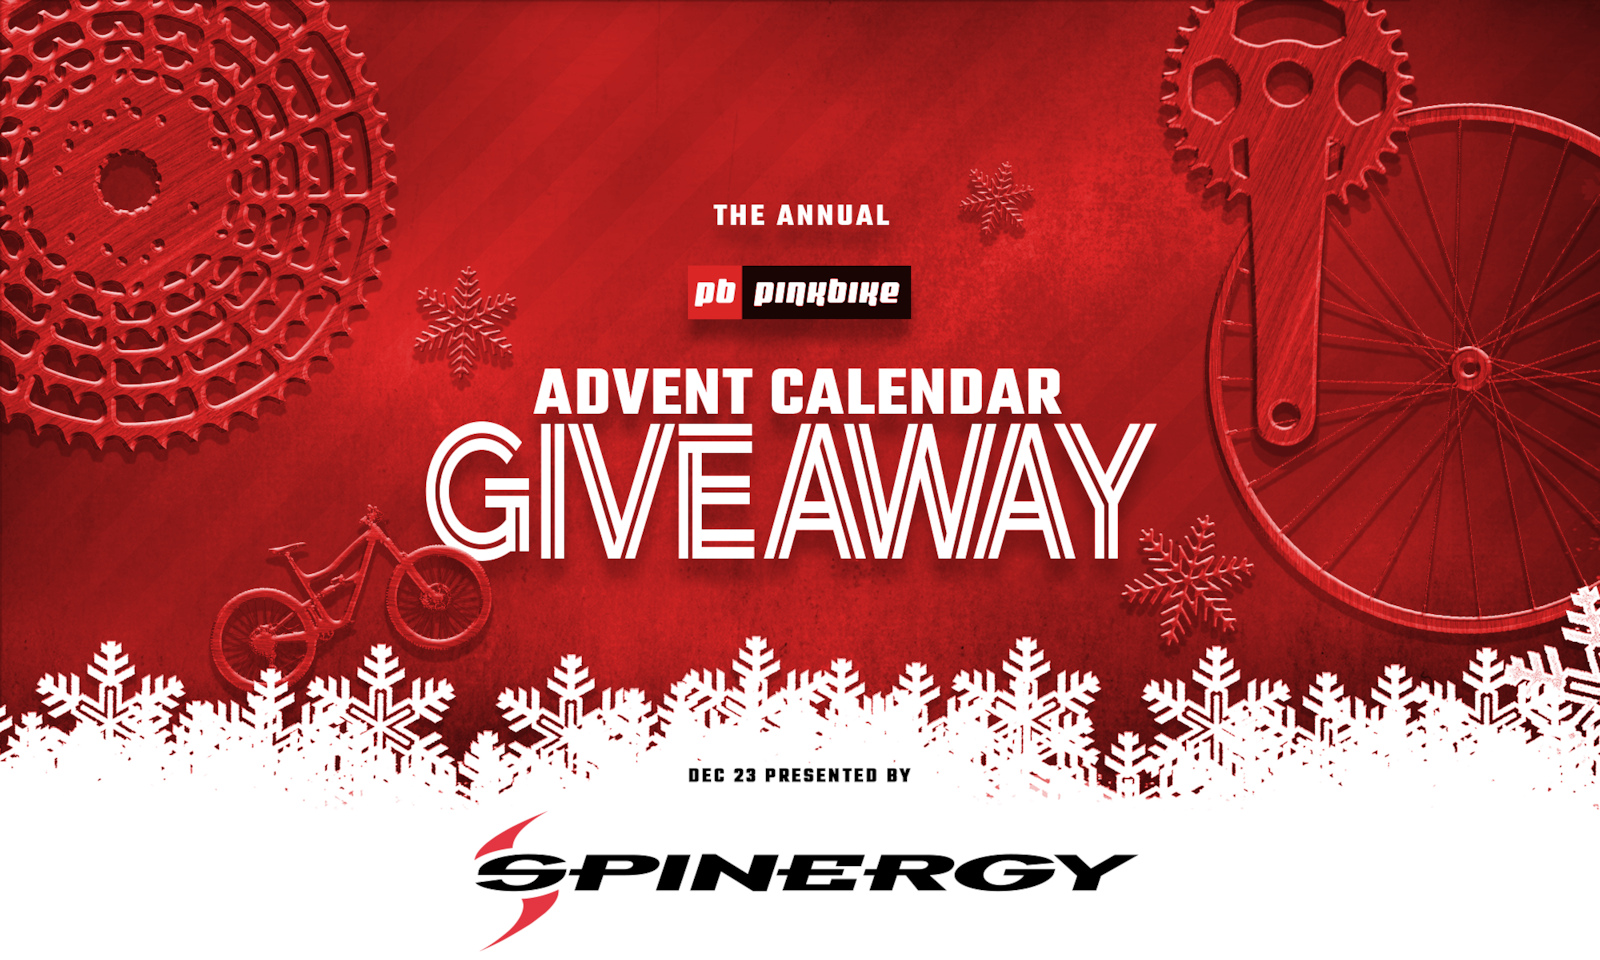 Enter To Win Spinergy MXX30 Carbon MTB Wheels Pinkbike's Advent